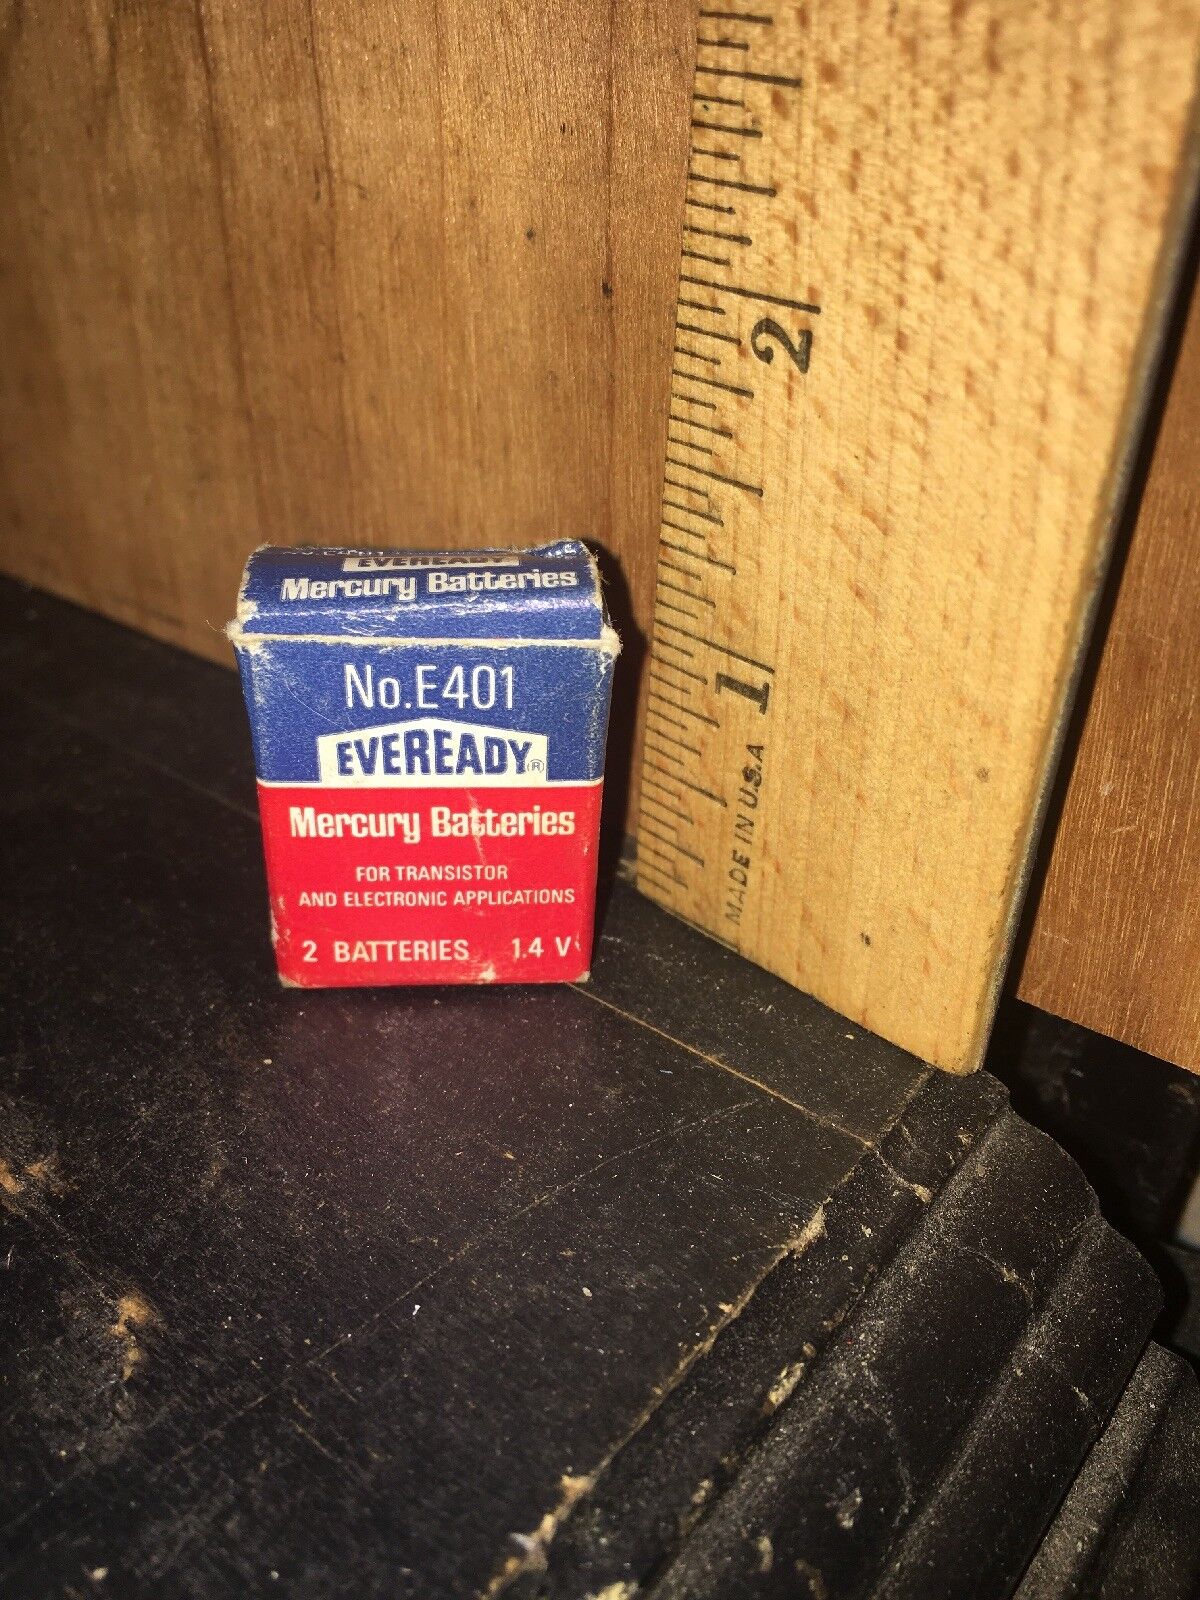 EVEREADY Miniature Battery’s For DISPLAY No.E401